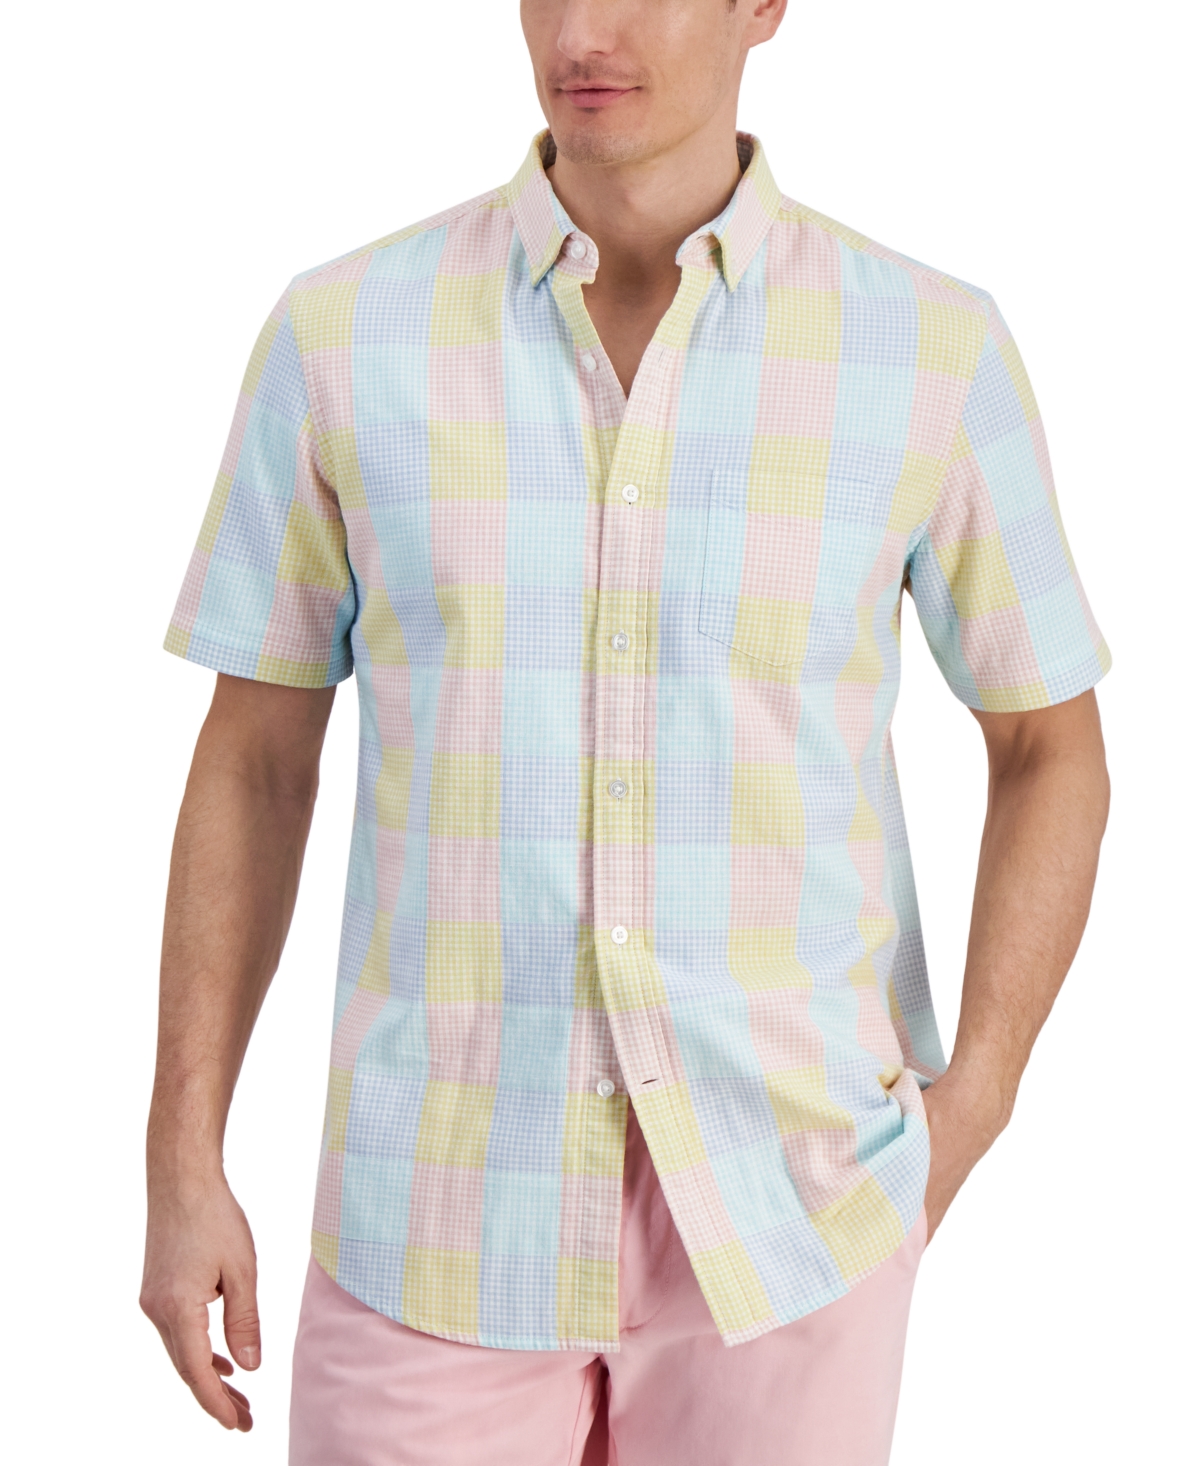 Men's Short Sleeve Button Front Madras Plaid Shirt, Created for Macy's - Multi